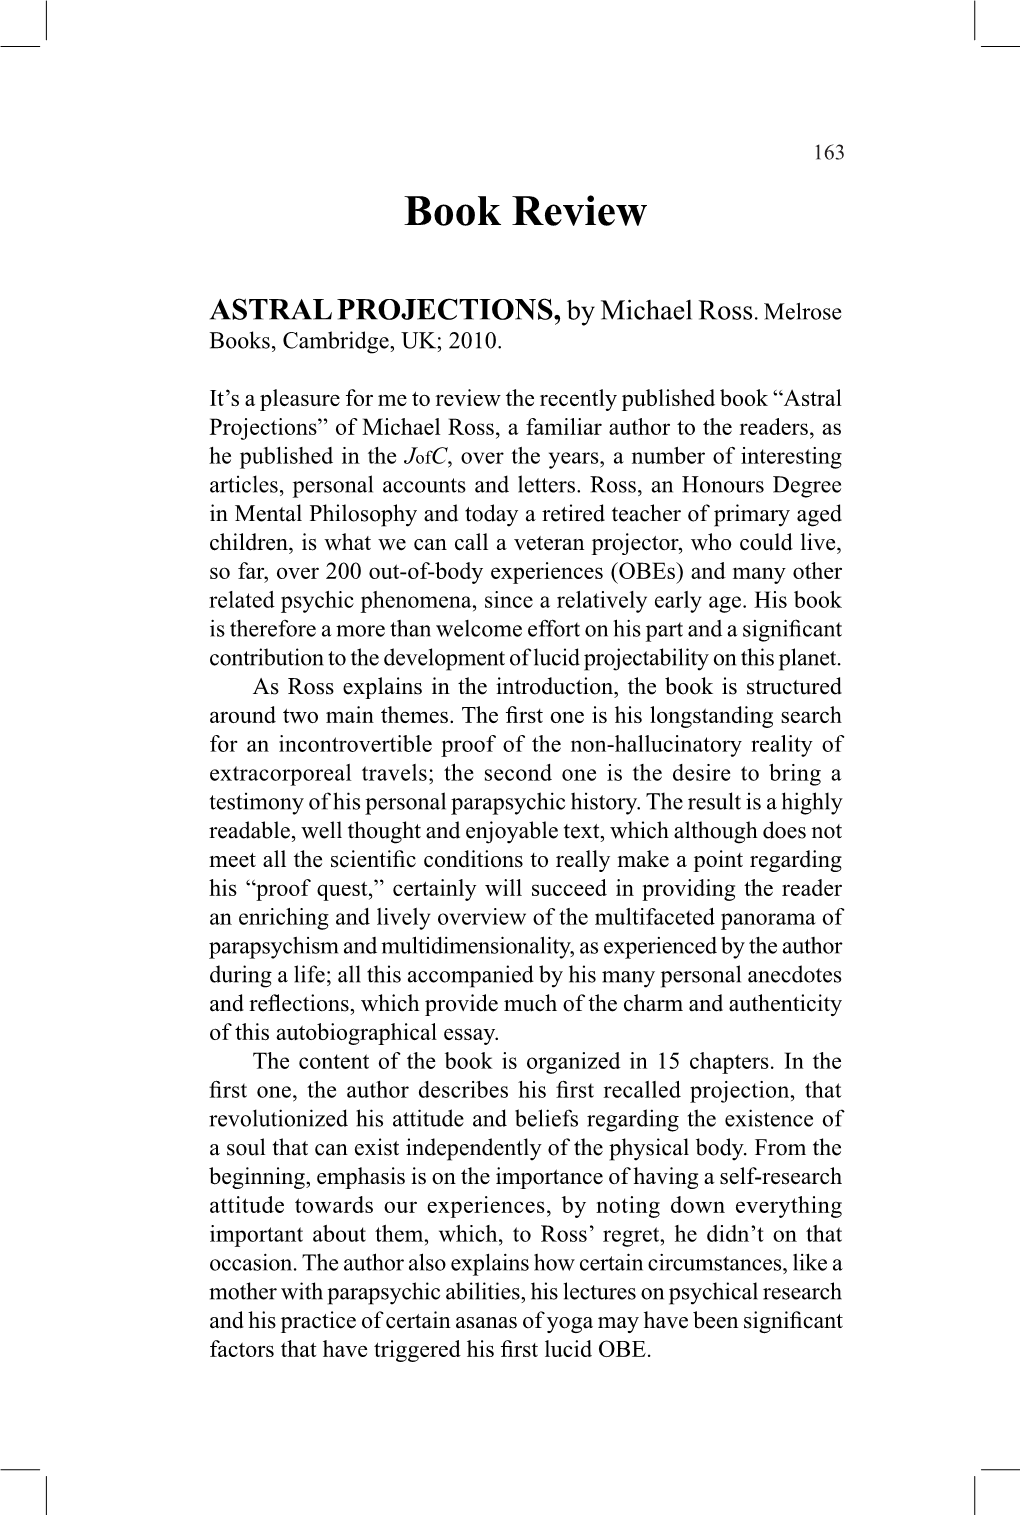 ASTRAL PROJECTIONS, by Michael Ross. Melrose Books, Cambridge, UK; 2010